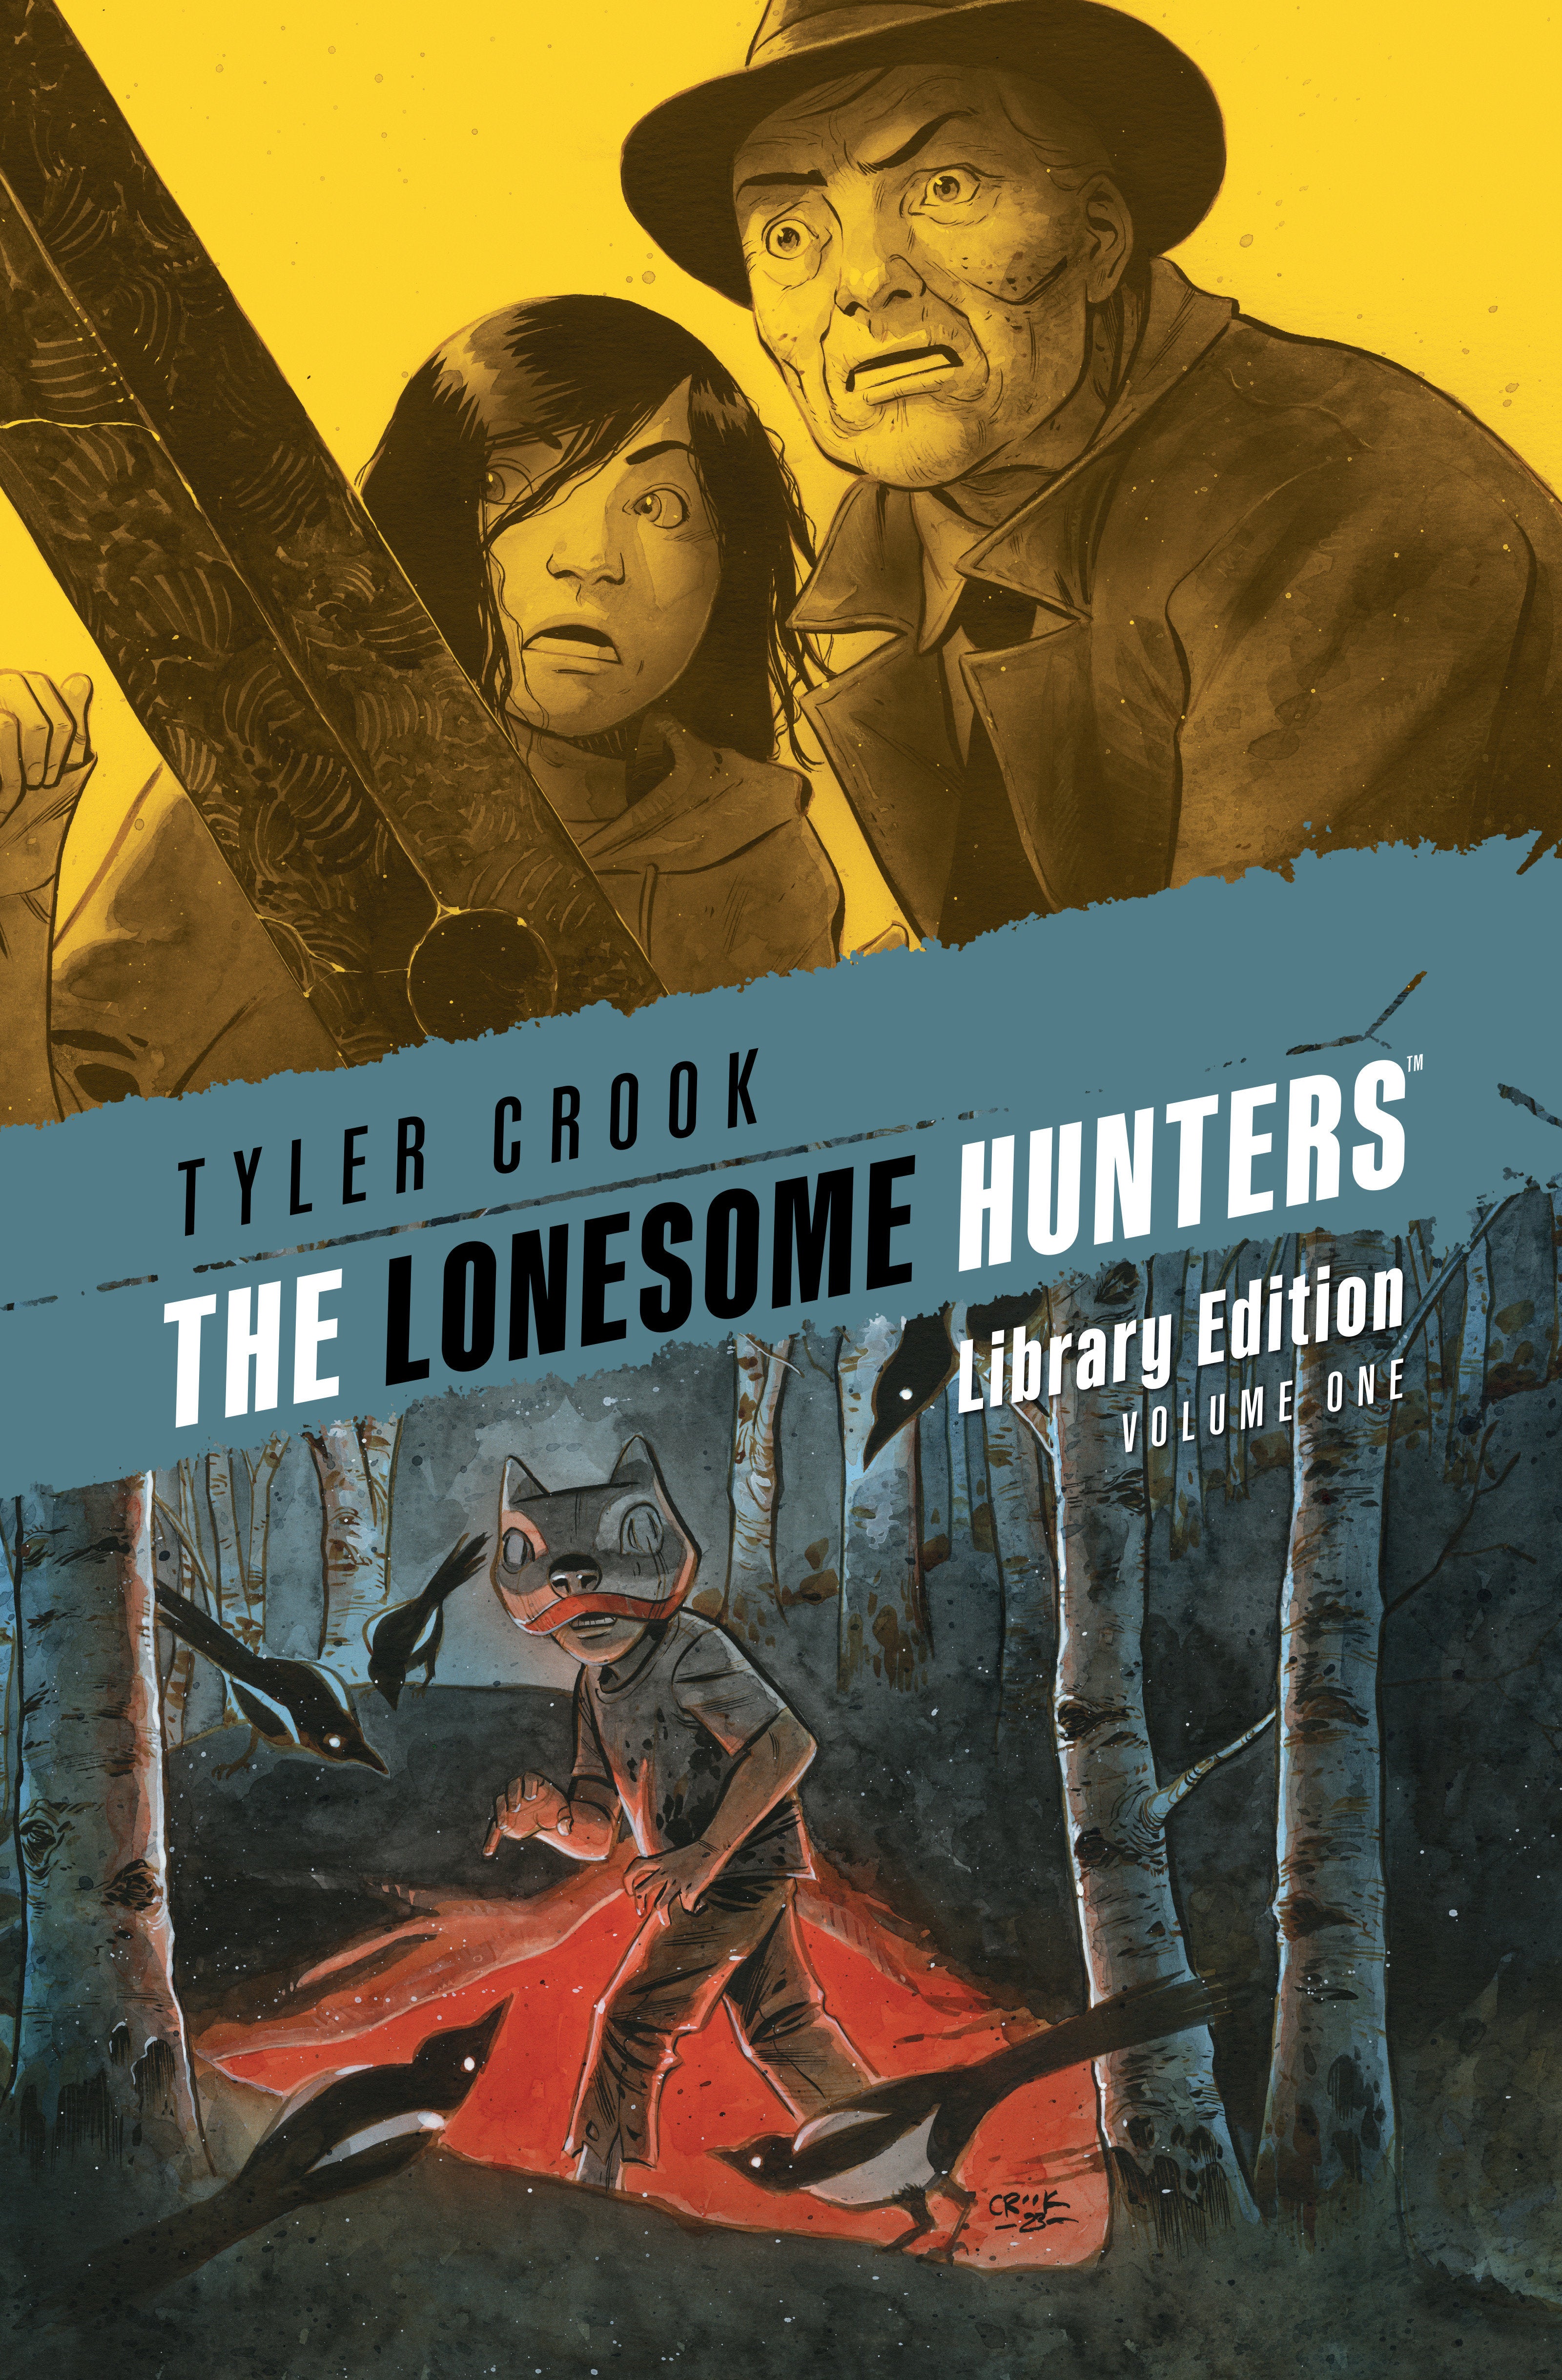 The Lonesome Hunters Library Edition | BD Cosmos